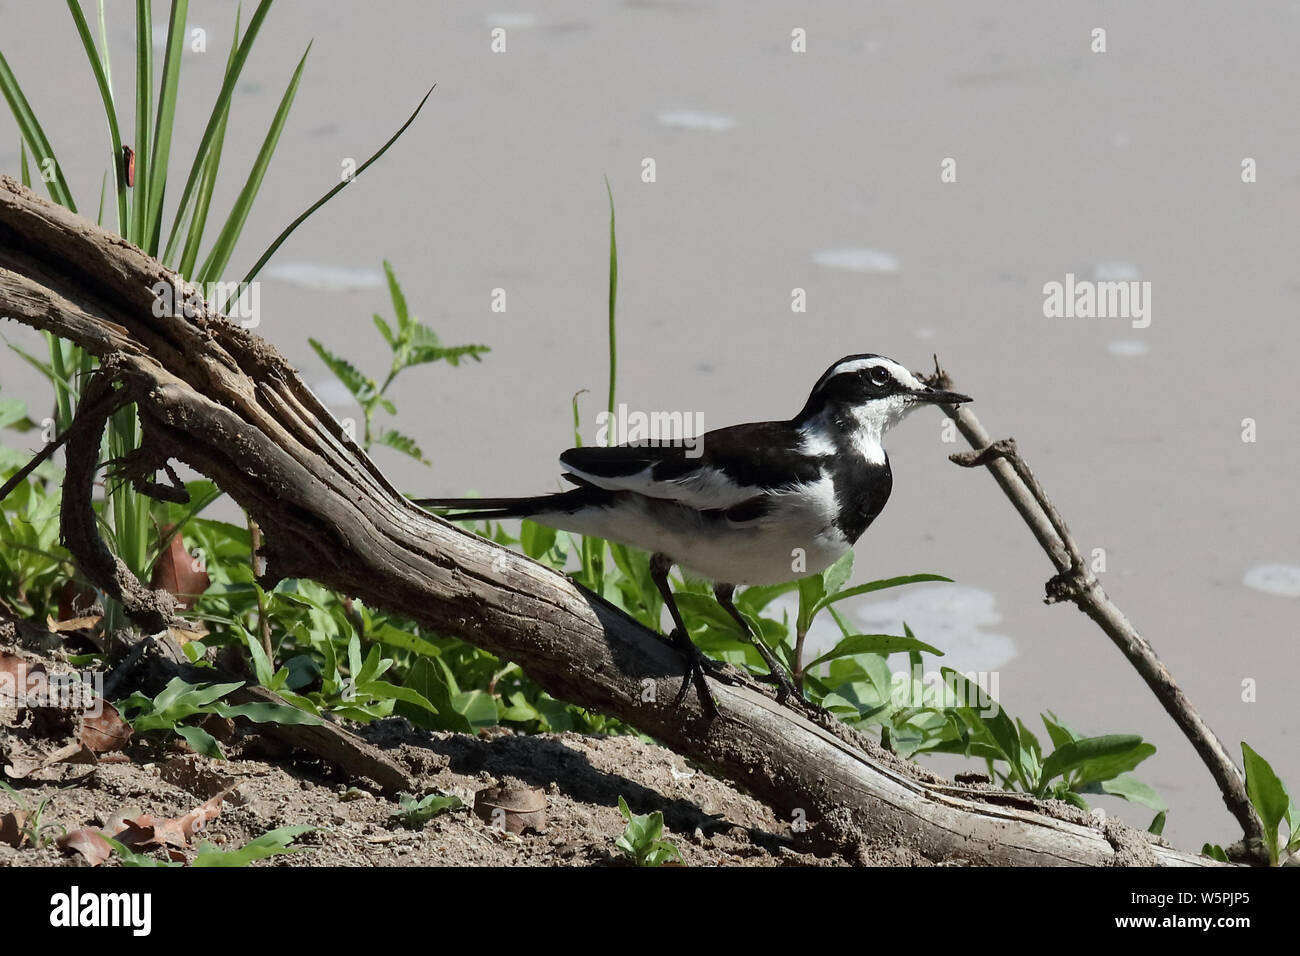 Witwenstelze / African pied wagtail / Motacilla aguimp Foto Stock